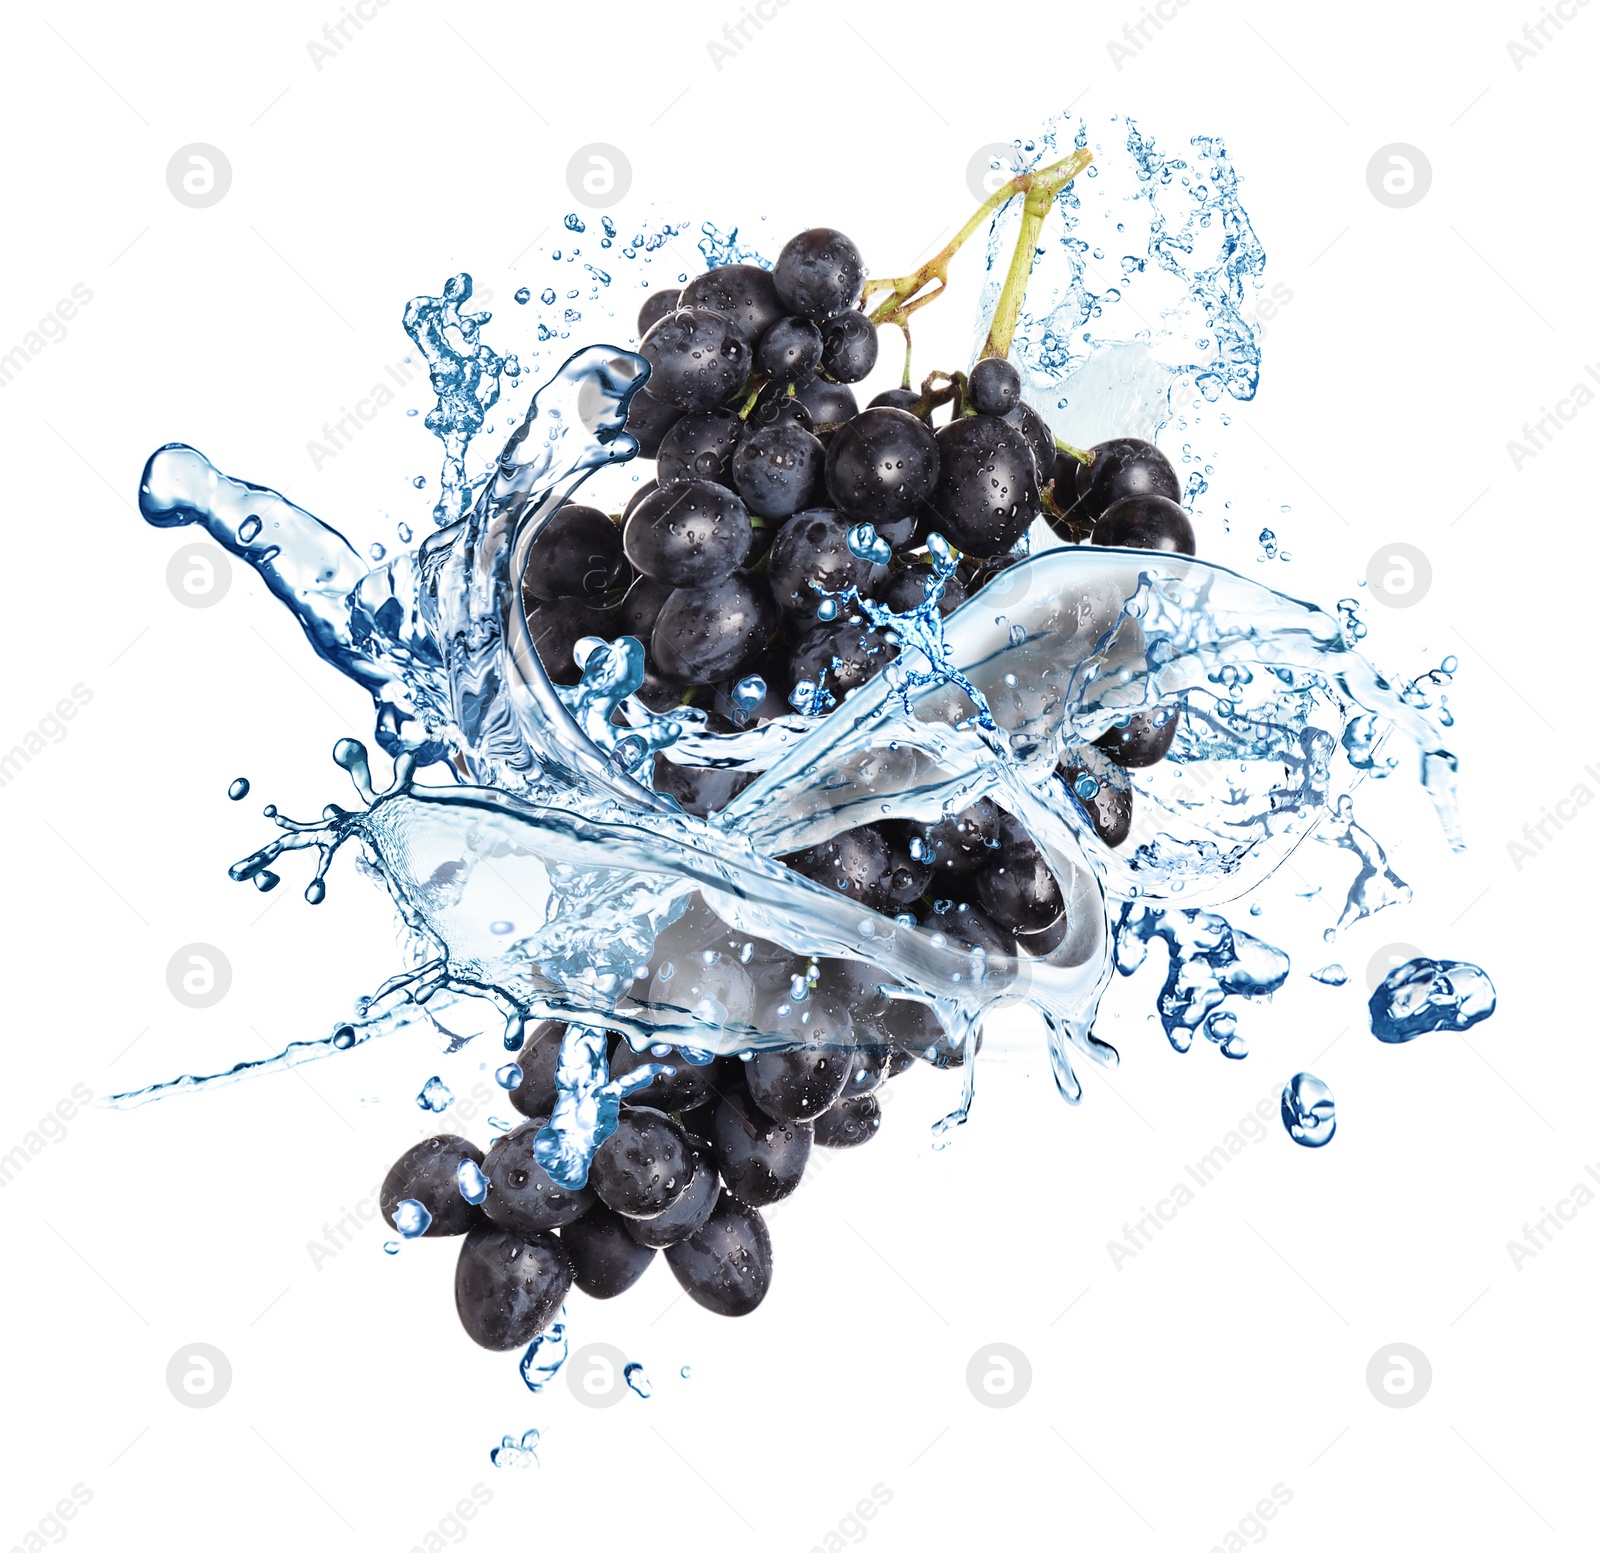 Image of Grape cluster with water splash on white background